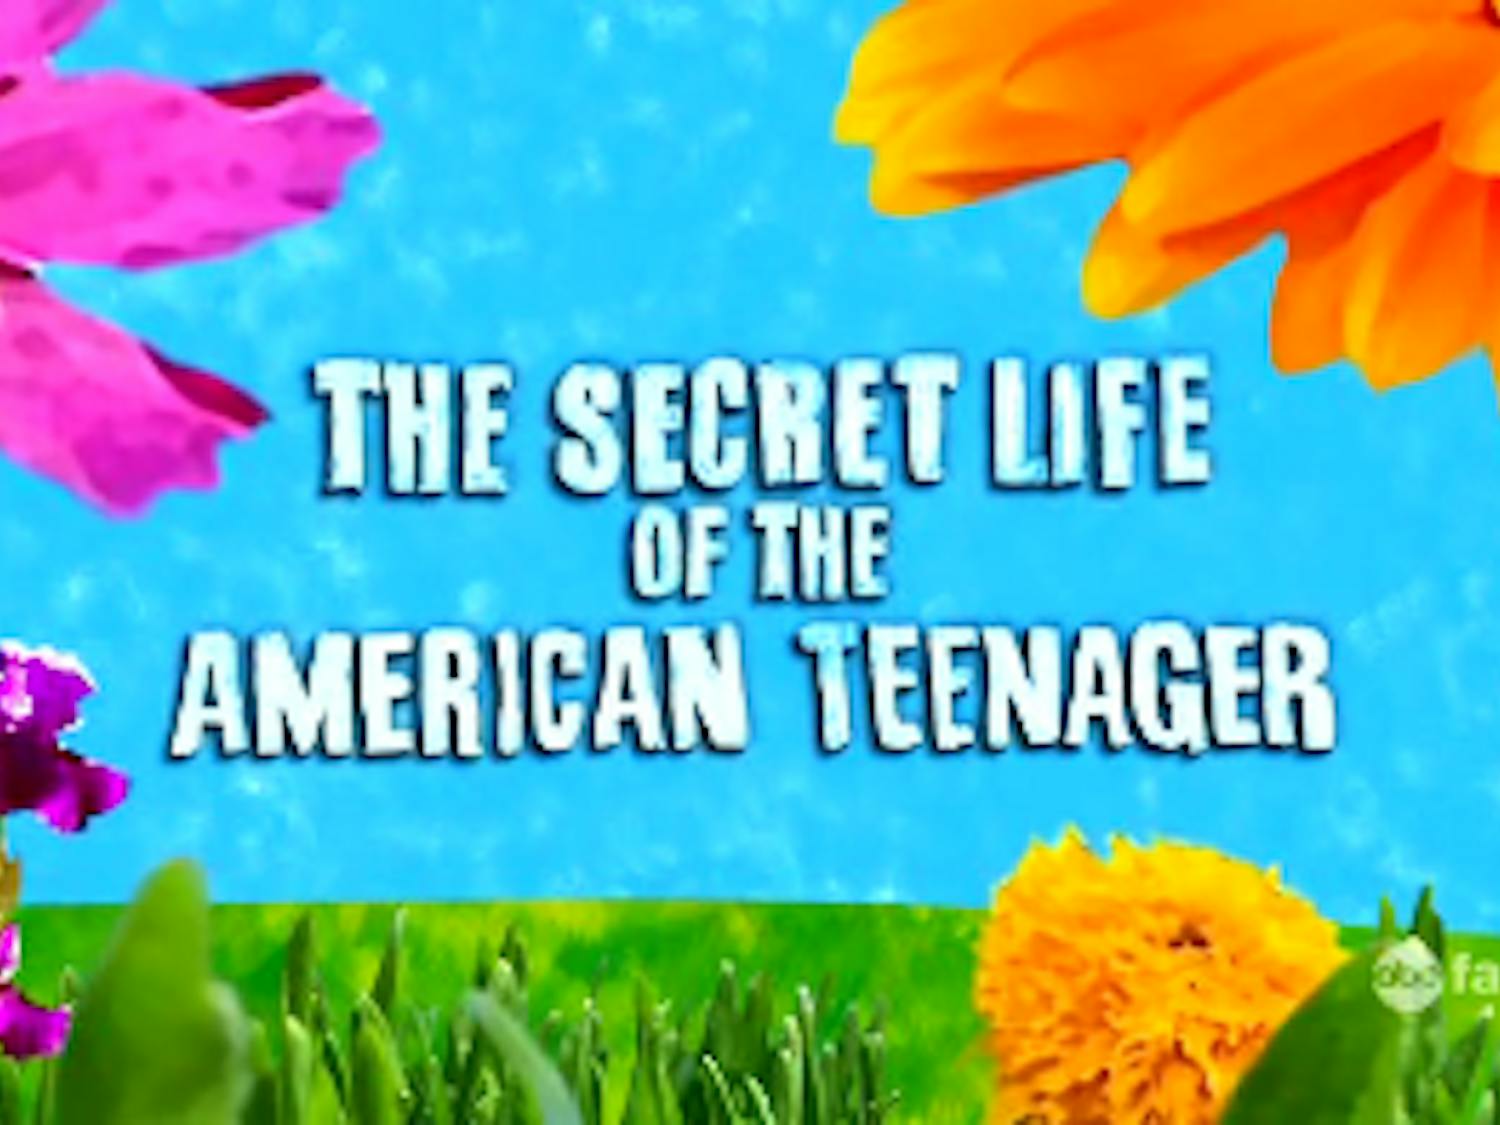 In 2008, “The Secret Life of the American Teenager” premiered, covering more mature topics such as teenage pregnancy, sex and sexual identity.“ In January, ABC Family will become FreeForm, reflecting the more serious and adult content the channel now broadcasts.